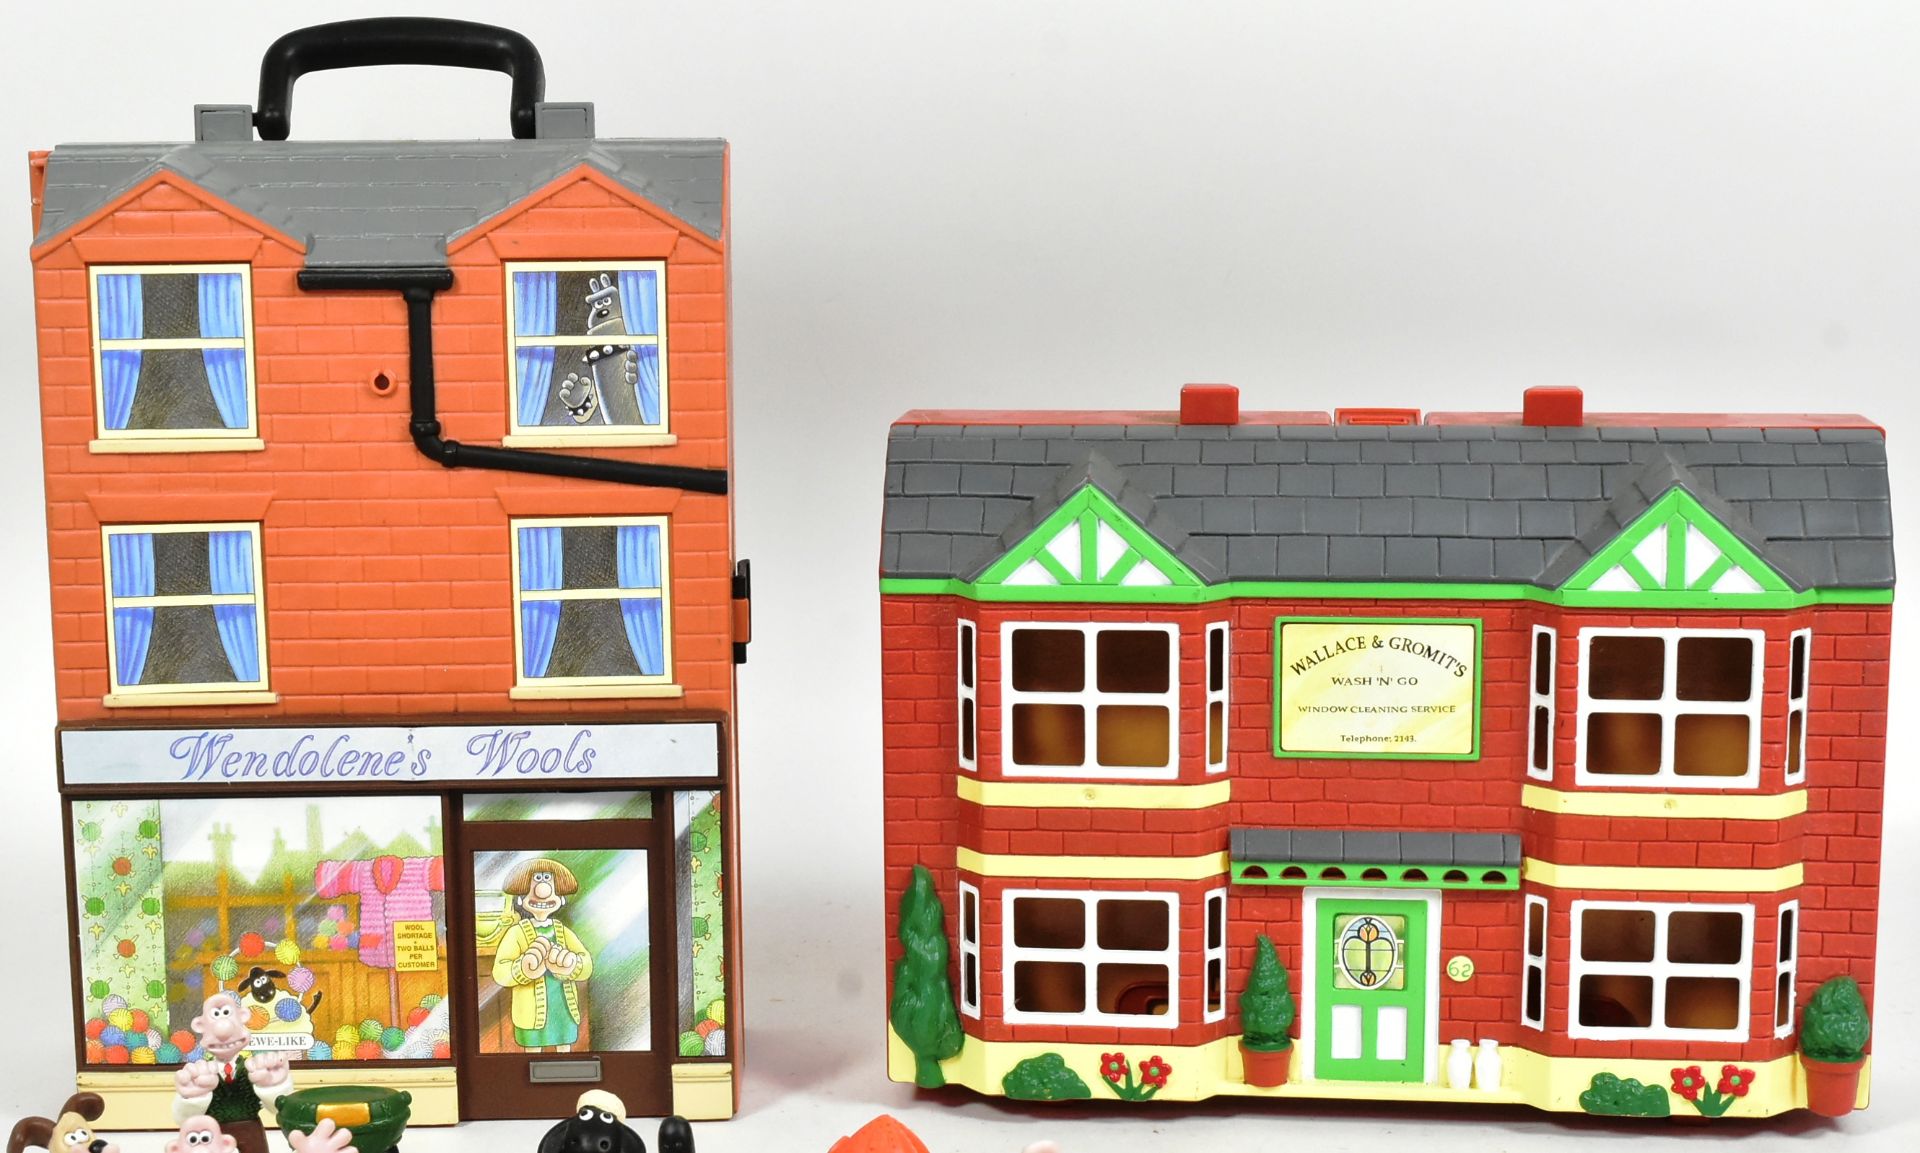 WALLACE & GROMIT - VINTAGE CARRY CASE PLAYSETS - Image 6 of 6